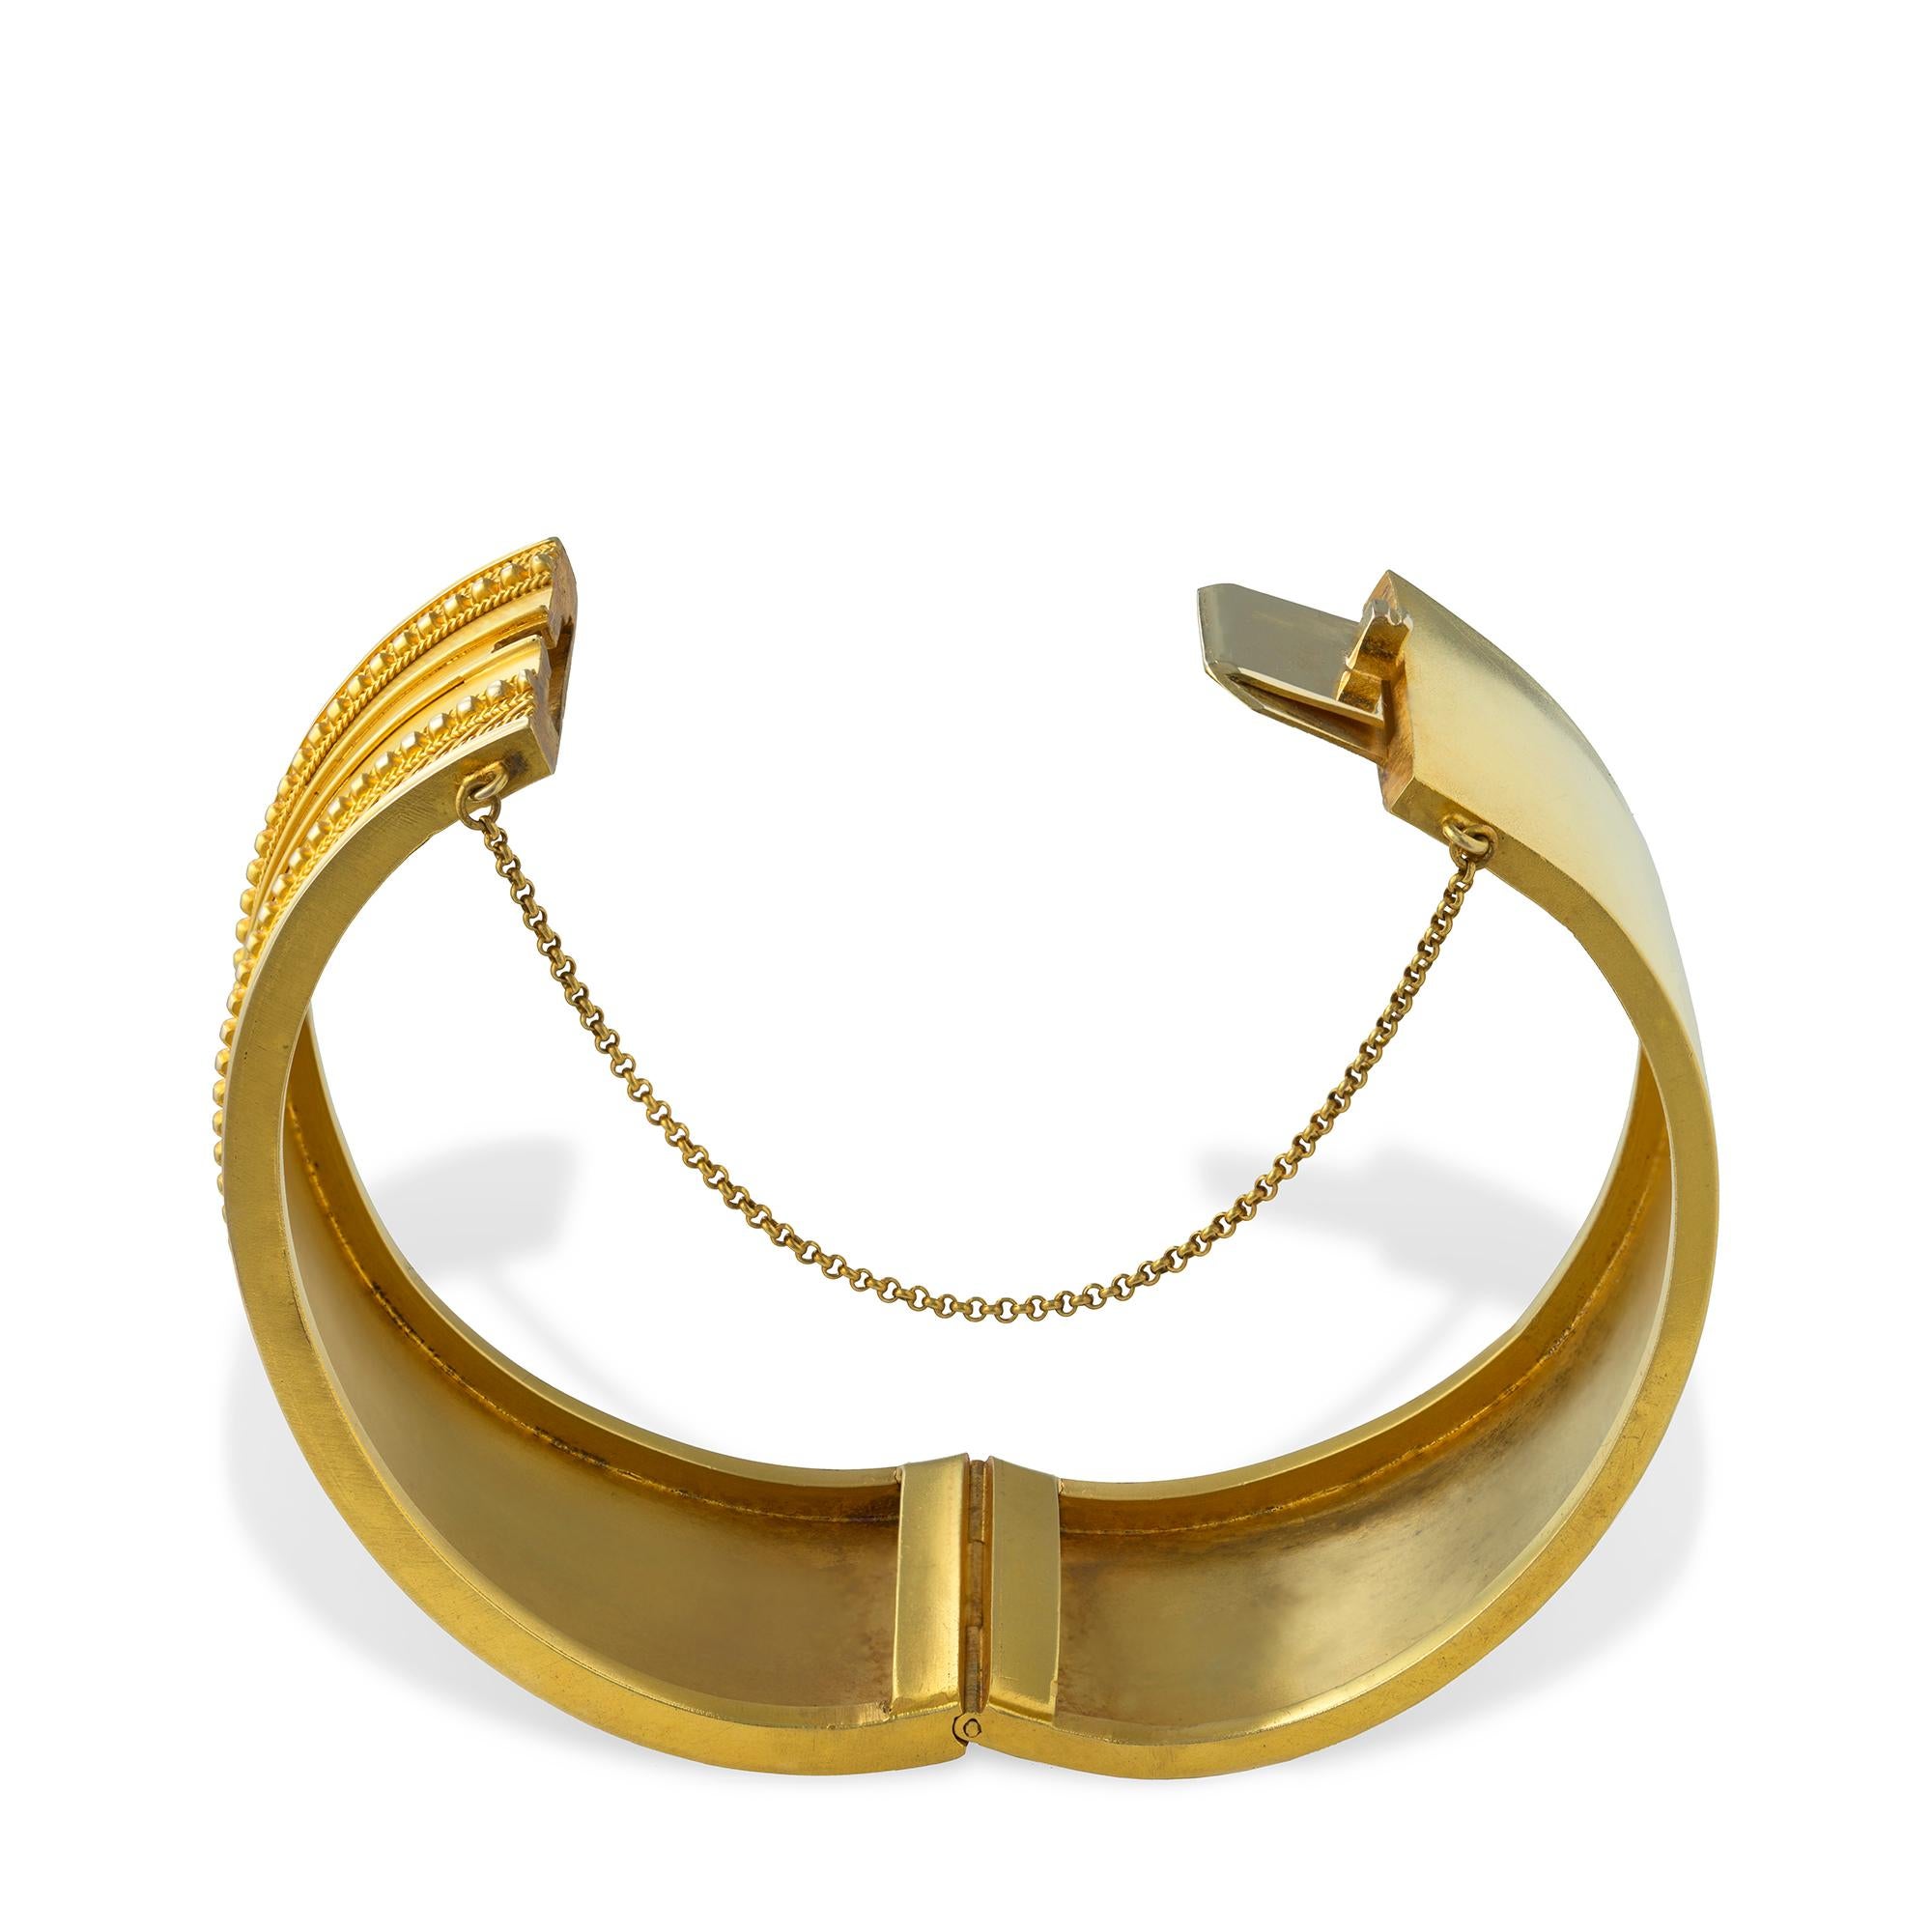 An Etruscan Revival yellow gold bangle, the front bordered by Etruscan style design with granulation to a plain gold back and concealed hinged clasp with safety chain, circa 1870,measuring internally  5.5 x 4.9cm, gross weight 32.5 grams.

This